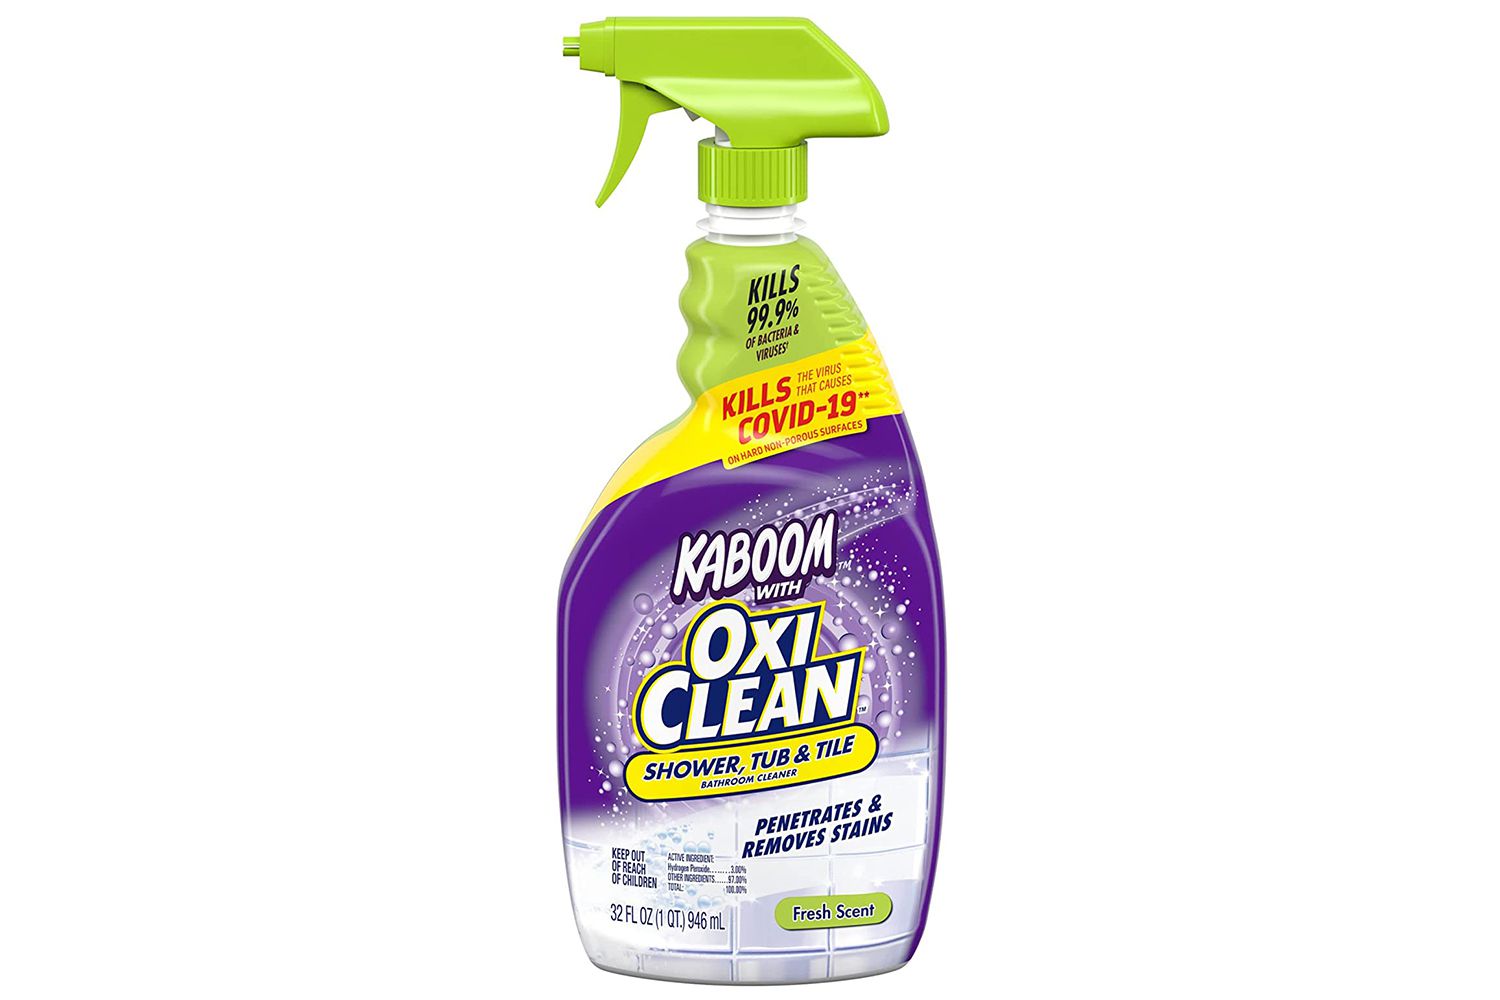 Kaboom With OxiClean Shower, Tub, and Tile Cleaner